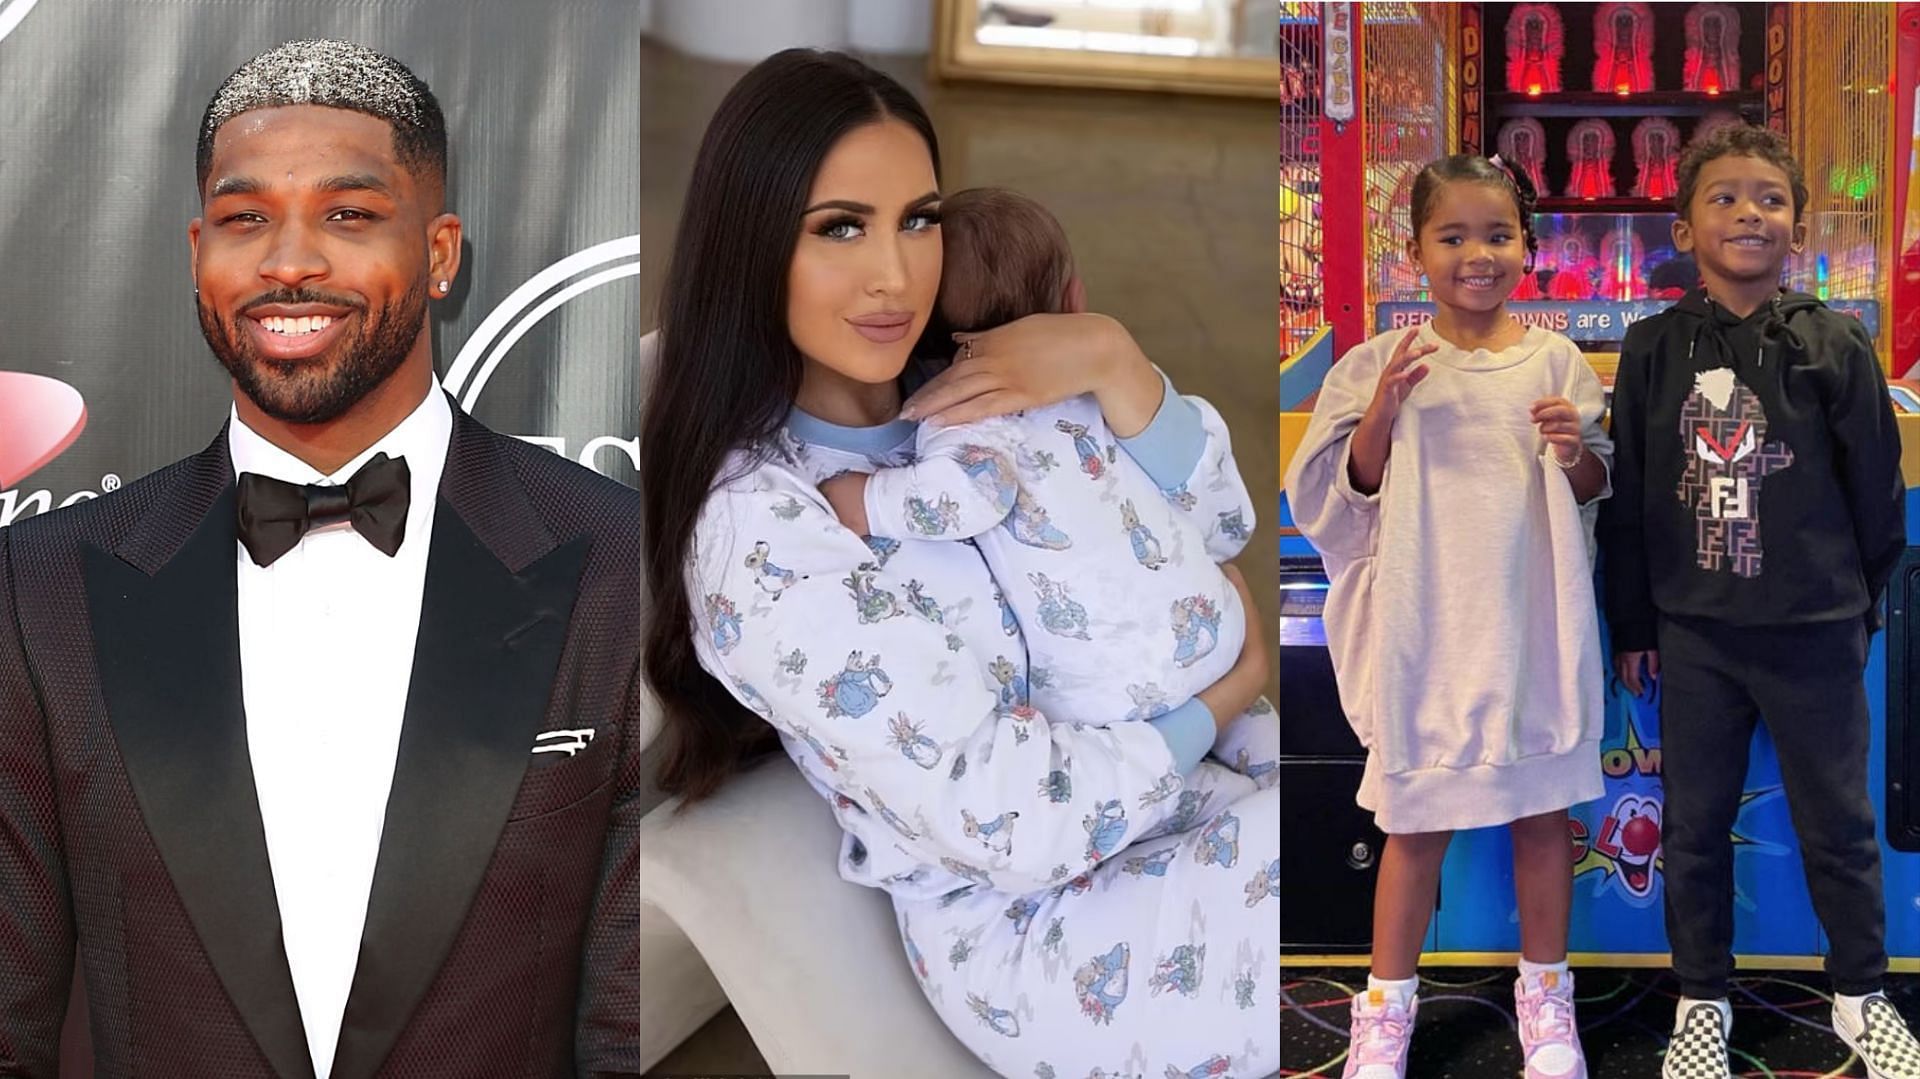 Tristan Thompson&#039;s son with Maralee Nichols, his third with as many women, turned 6 months old recently (Images via Joe Scarnici/Getty Images, Maralee Nichols/Instagram, and Tristan Thompson/Instagram)